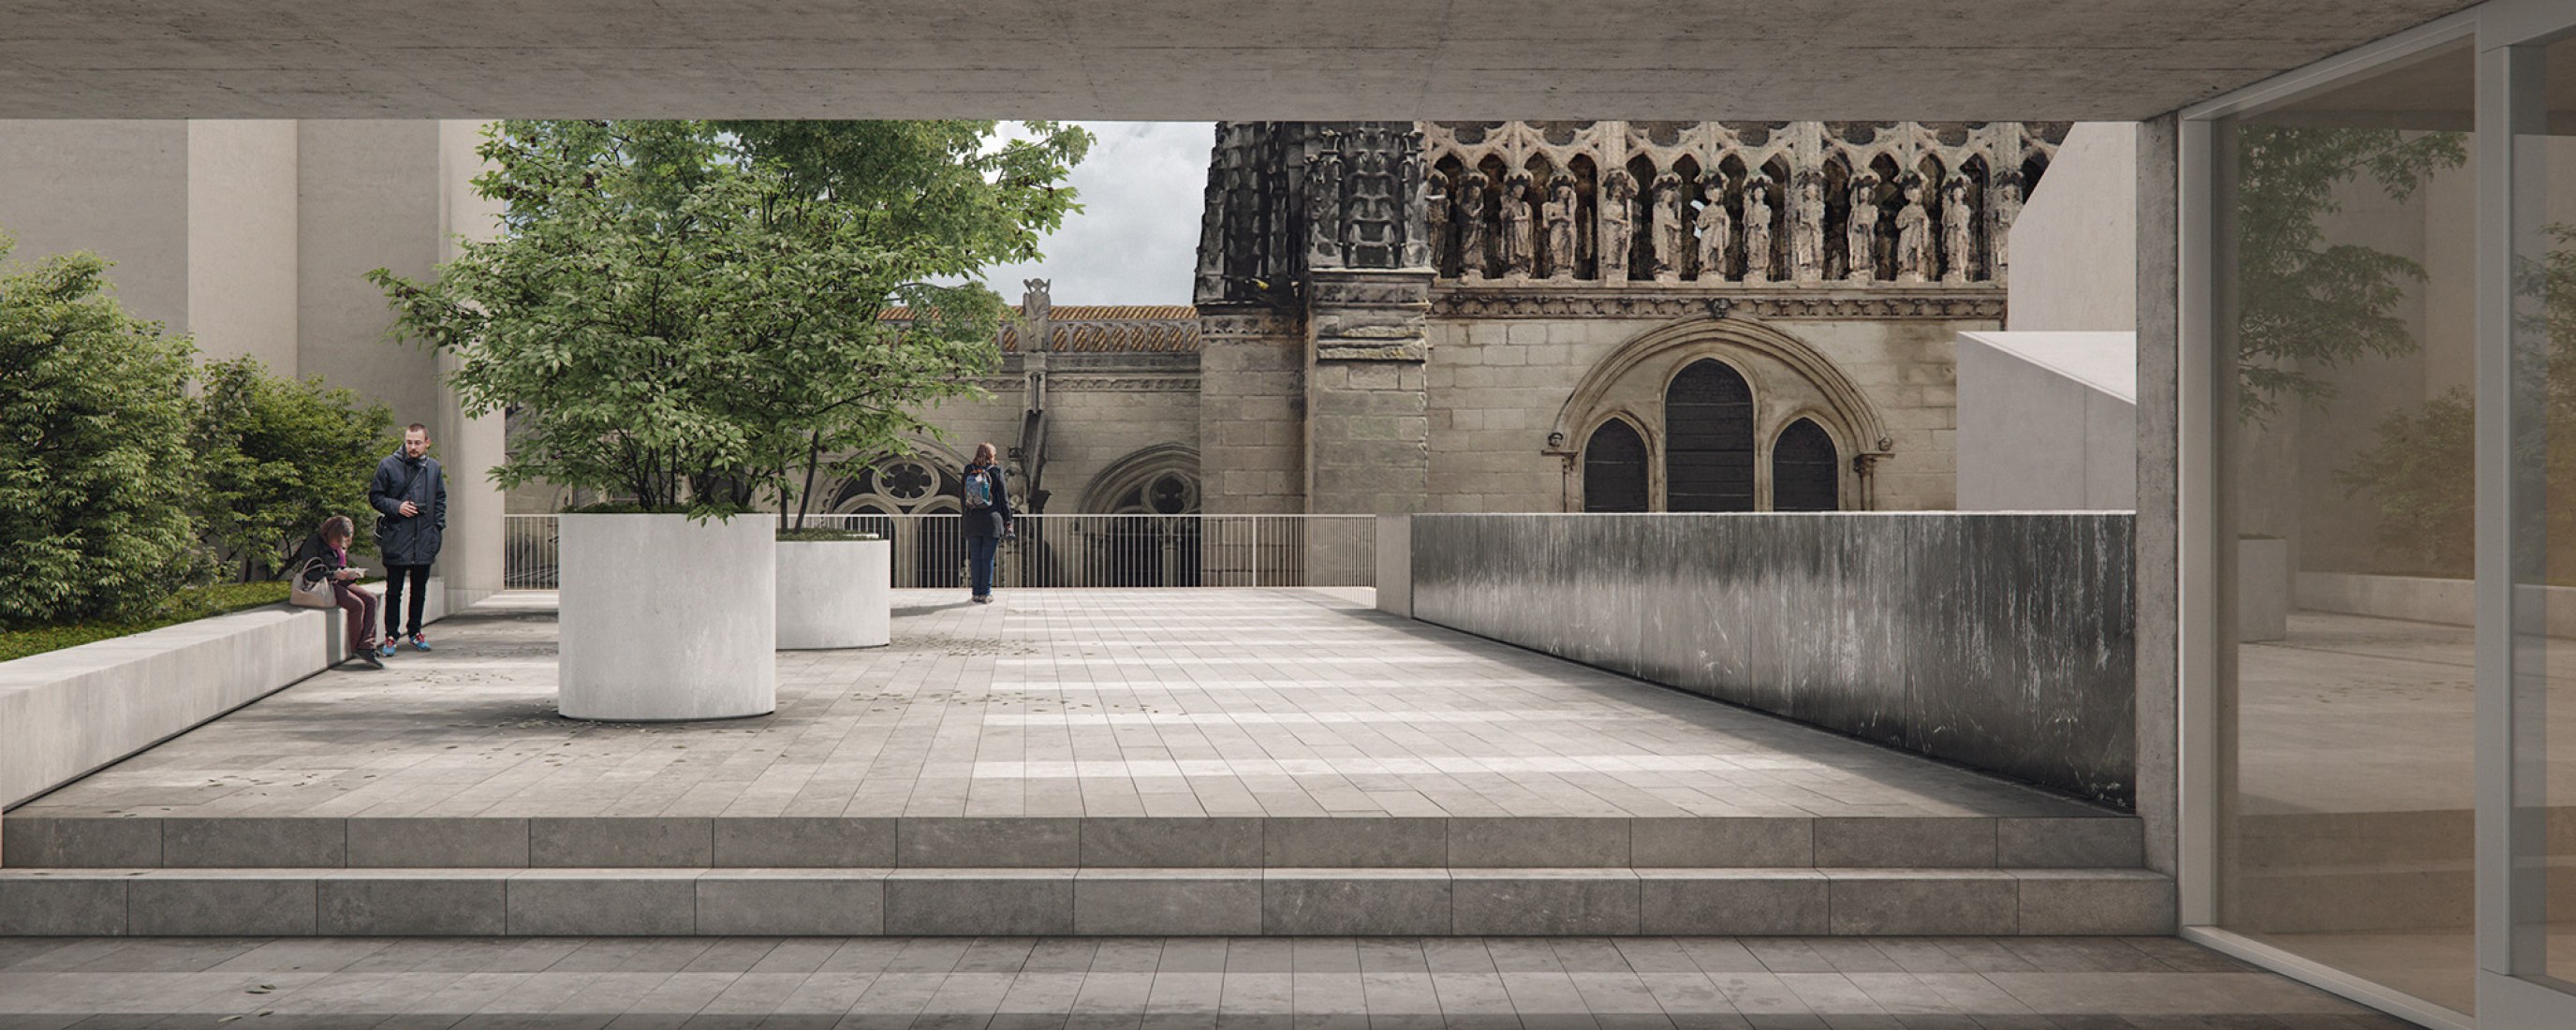 Extension of the Municipal Archive of Castilfalé by AGi architects. Rendering by The VIZ Design Company